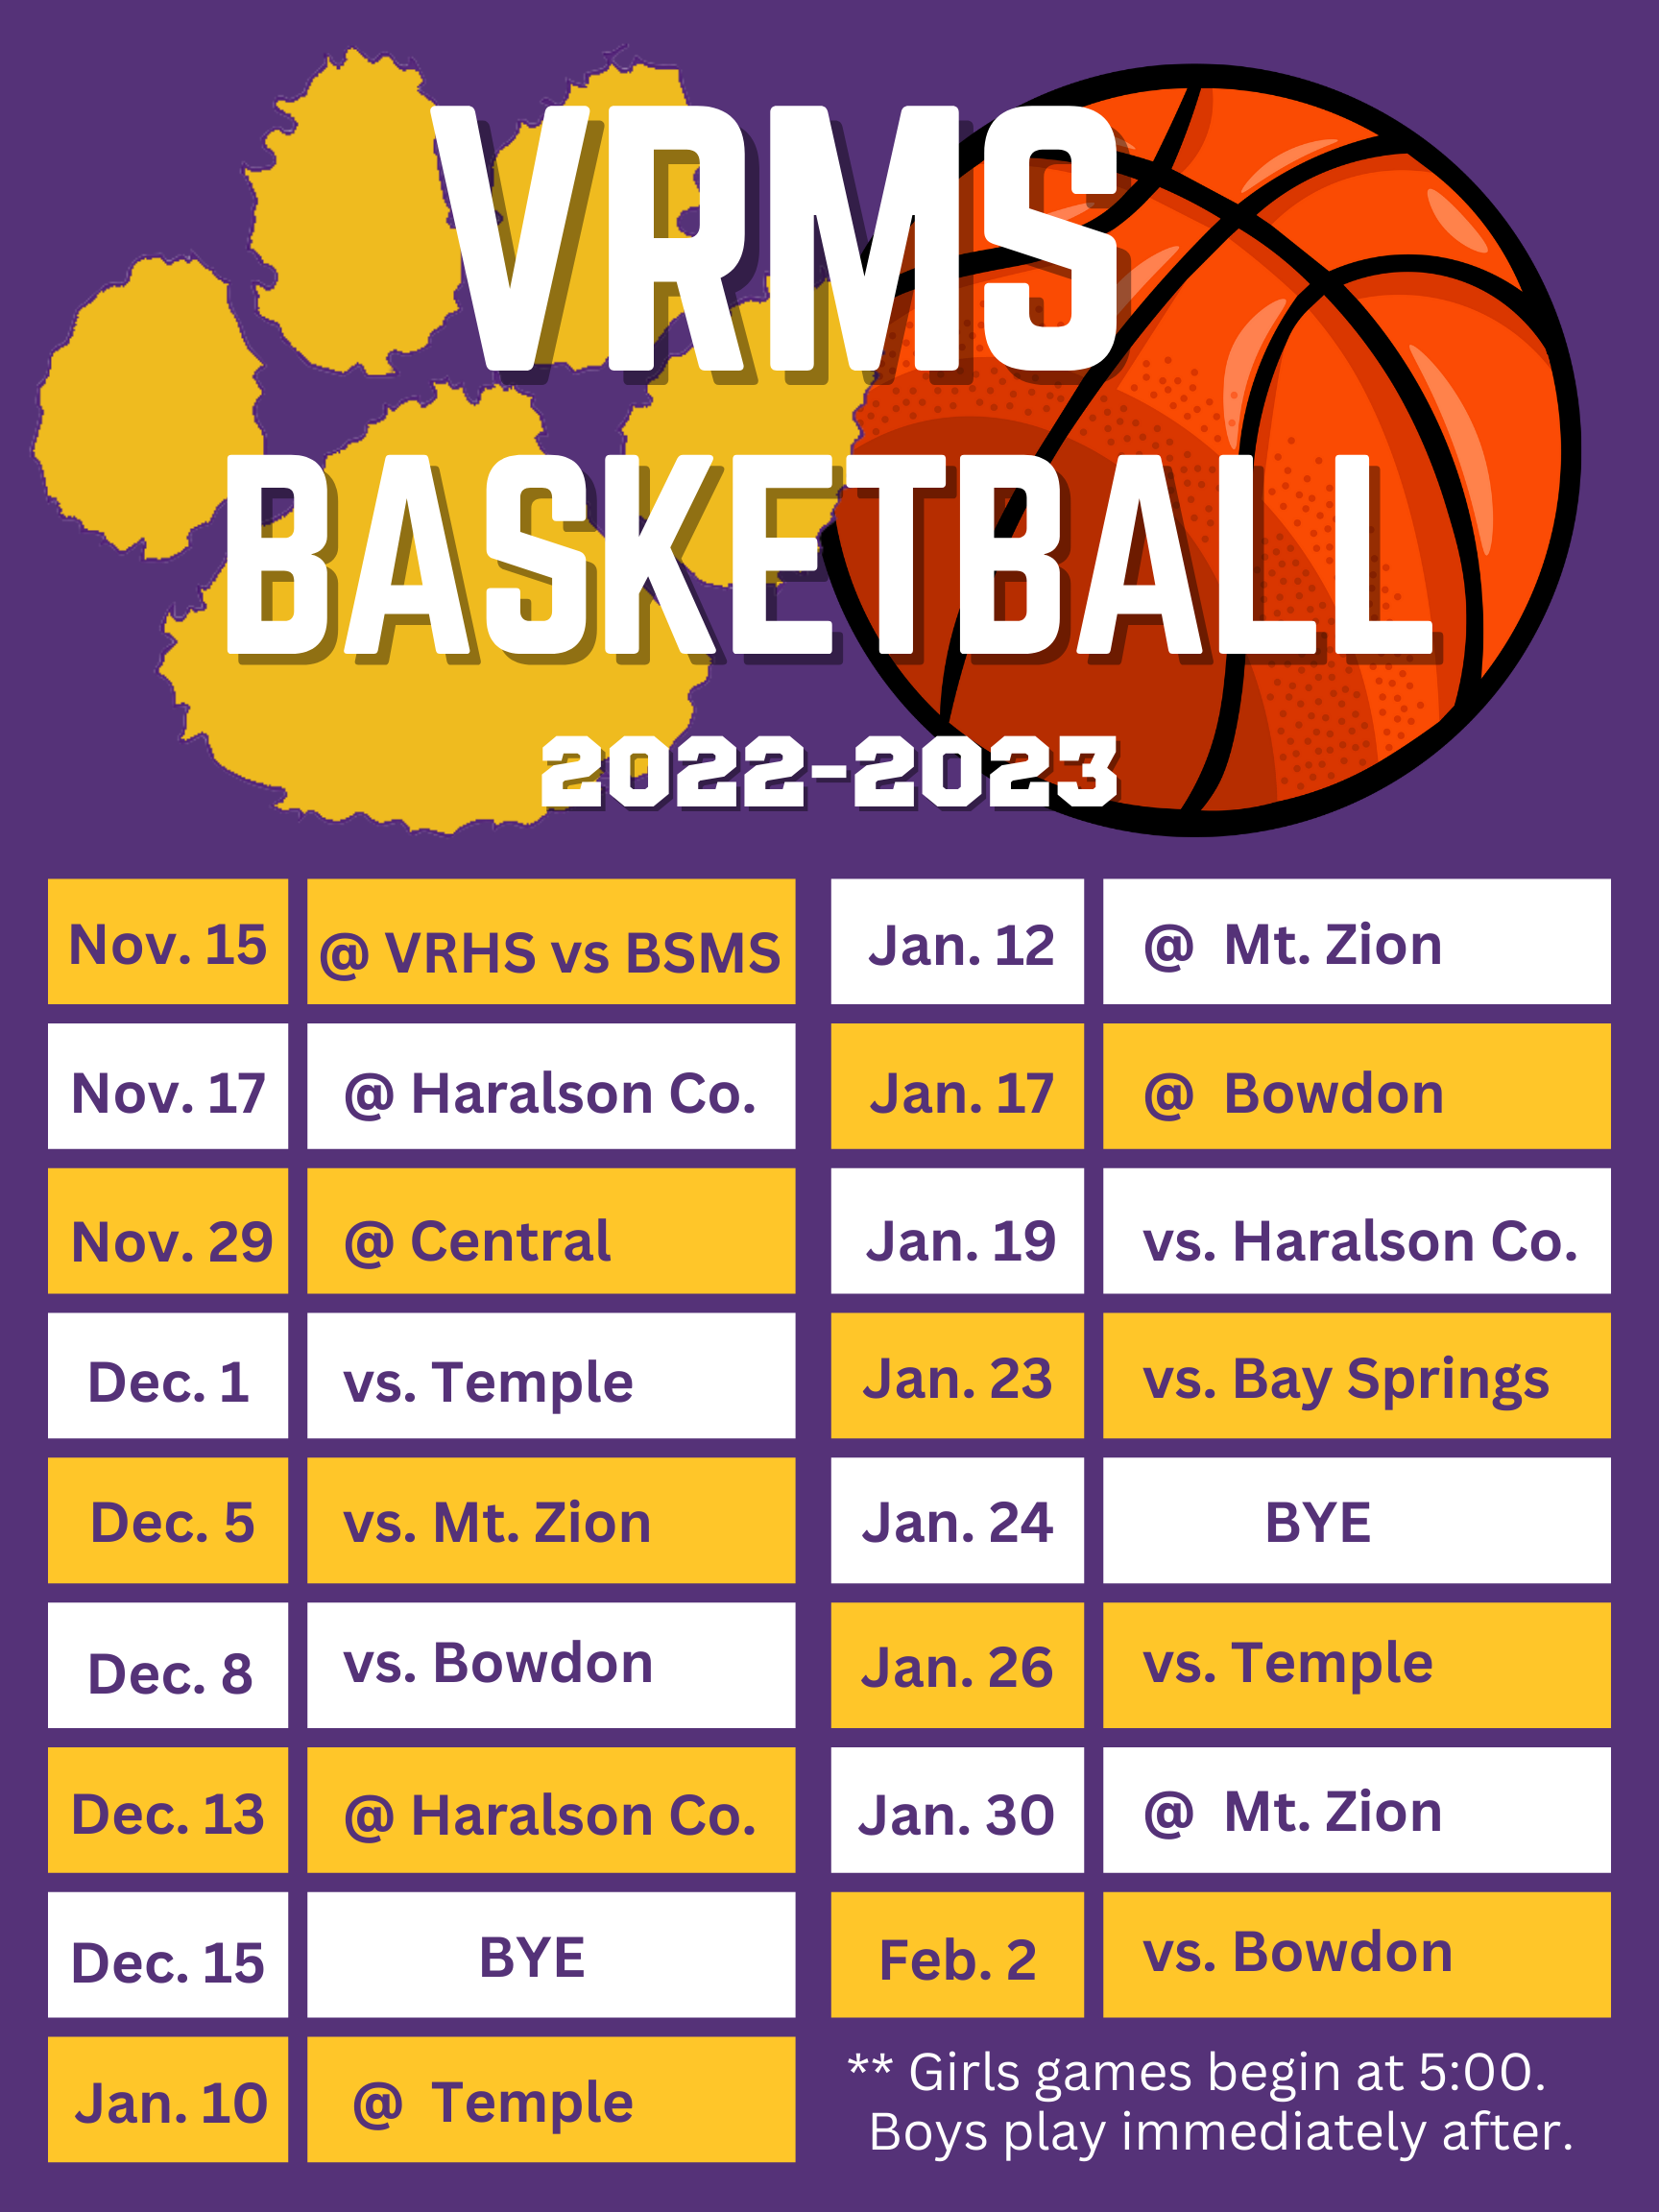  11/15 Bay Springs @ VRHS?? 11/17 @Haralson 11/29 @Central 12/1 Temple 12/5 Mt. Zion 12/8 Bowdon 12/13 @Haralson 12/15 Bye 1/10 @Temple 1/12 @Mt. Zion 1/17 @Bowdon 1/19 Haralson 1/23 Bay Springs 1/24 Bye 1/26 Temple 1/30 @Mt. Zion 2/2 Bowdon